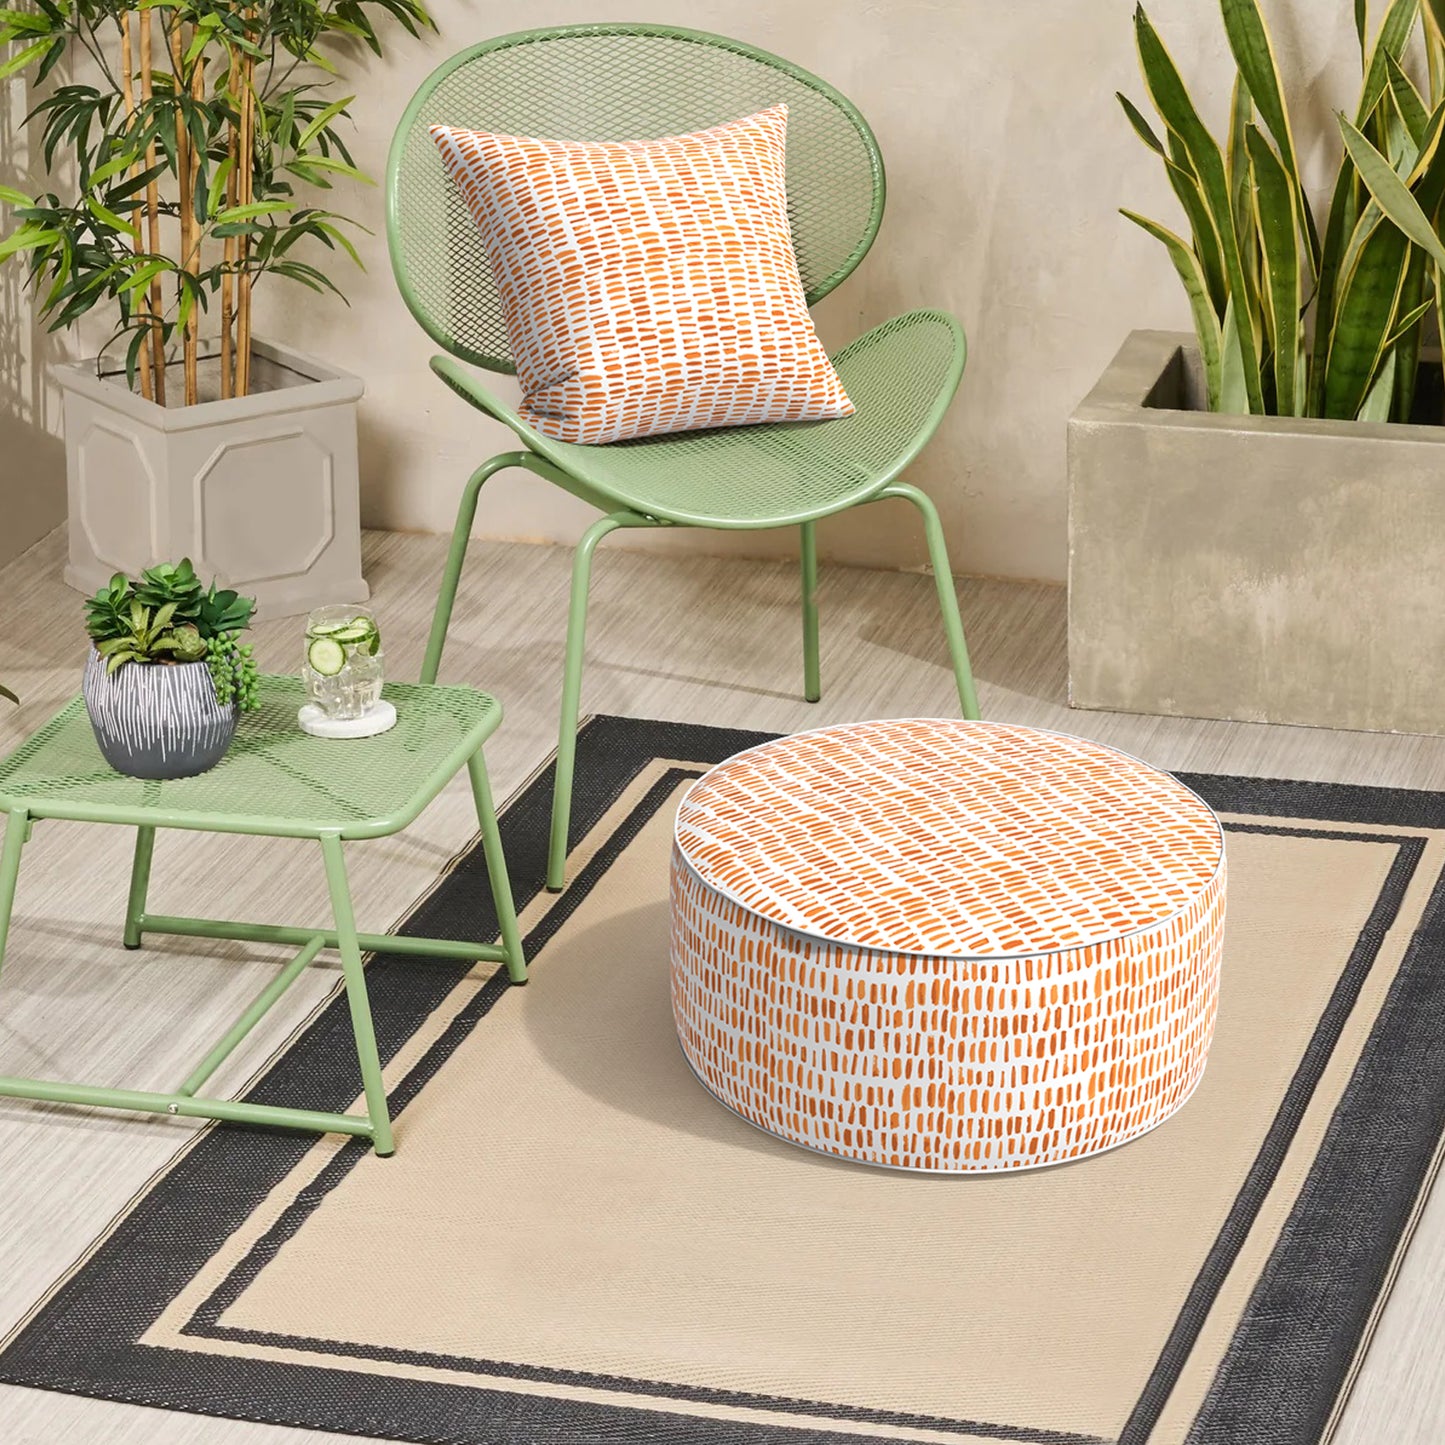 Melody Elephant Patio Inflatable Ottoman, 21x9 Inch Portable Stool Ottoman with Handle, Outdoor Round Footrest Stool for Garden Camping, Pebble Orange